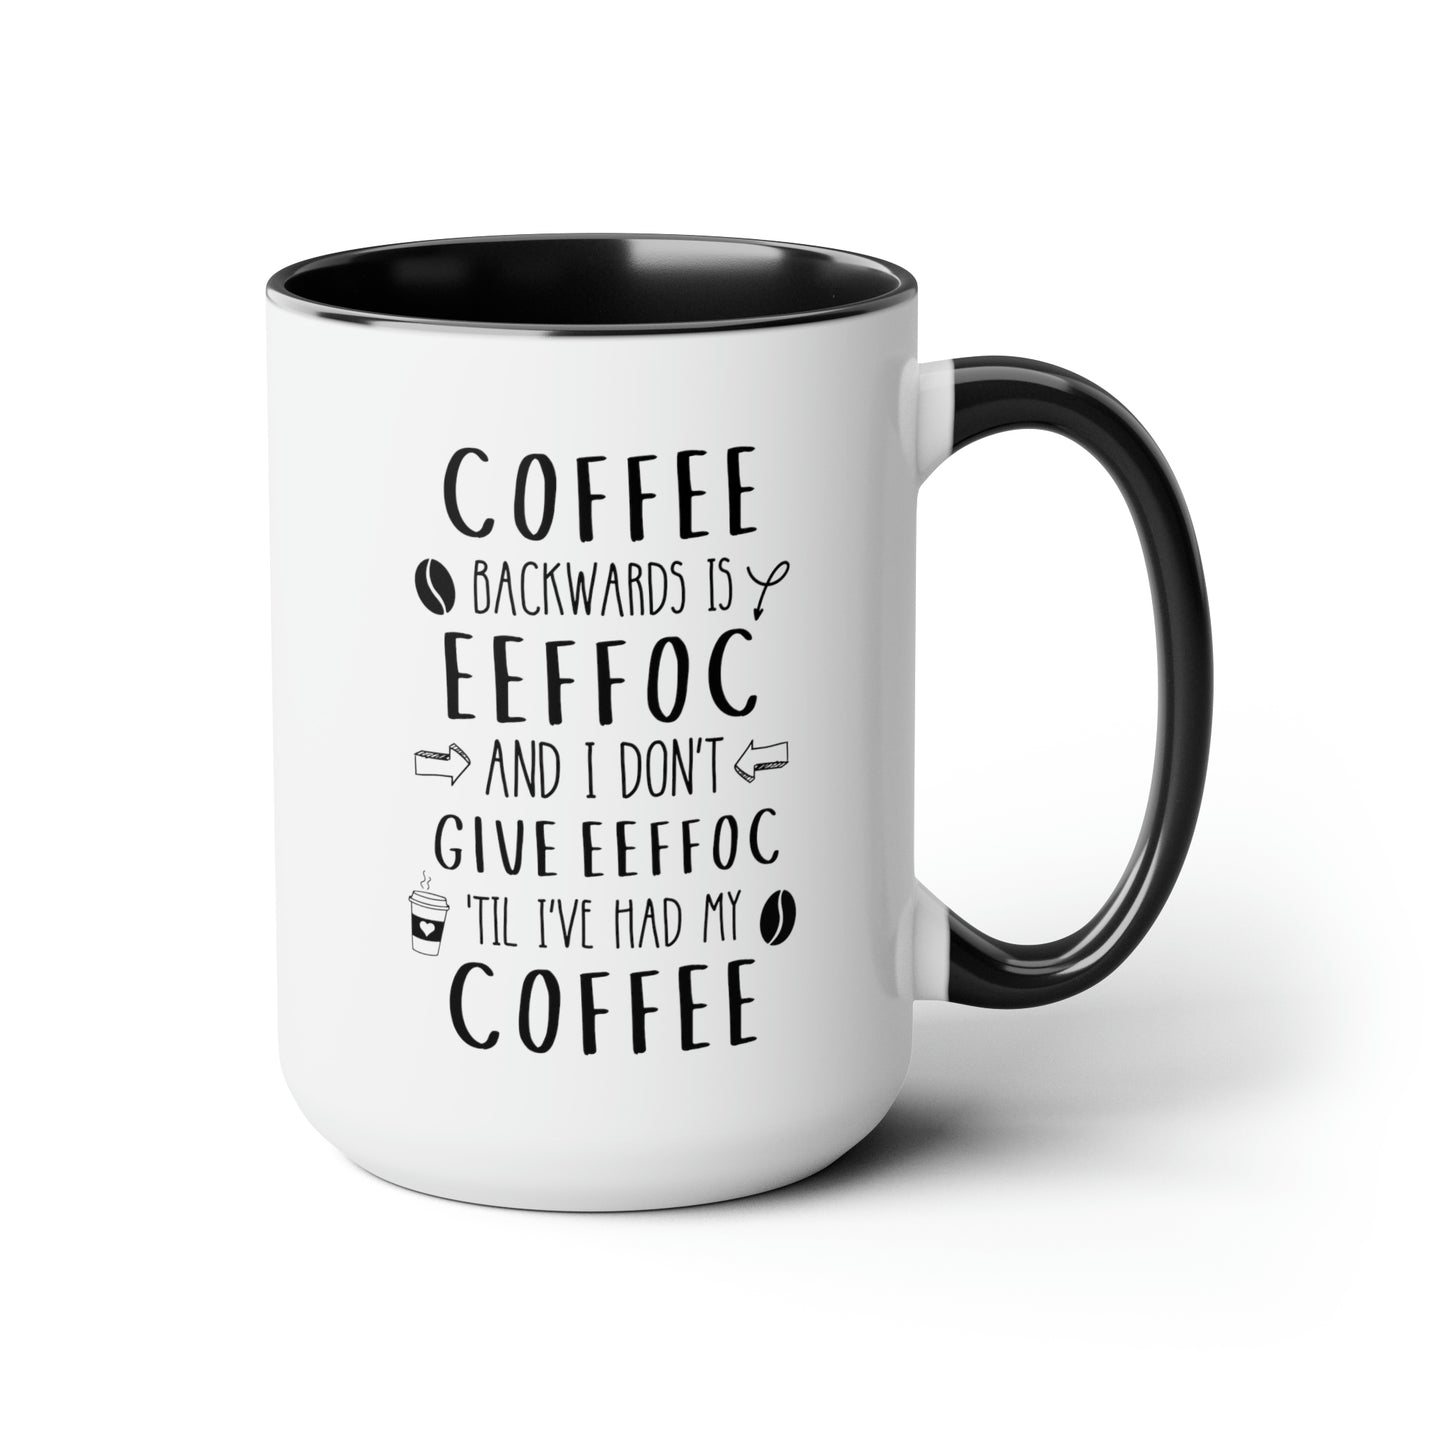 Coffee Backwards Is Eeffoc And I Dont Give Eeffoc Til Ive Had My Coffee 15oz white with black accent funny large coffee mug humor office waveywares wavey wares wavywares wavy wares